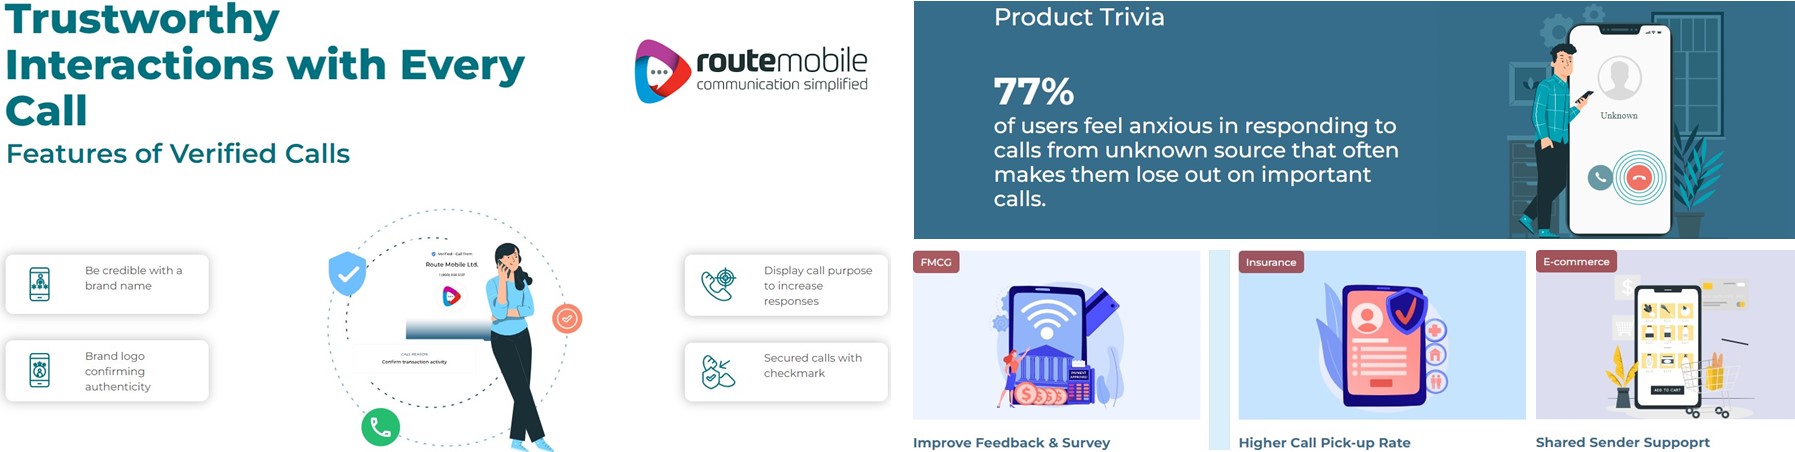 Route Mobile Ltd – The Global Leader In CPaaS & CXPaaS That Powers The Connectivity, Could Be Your Best To Invest In For At Least Next 3 Years